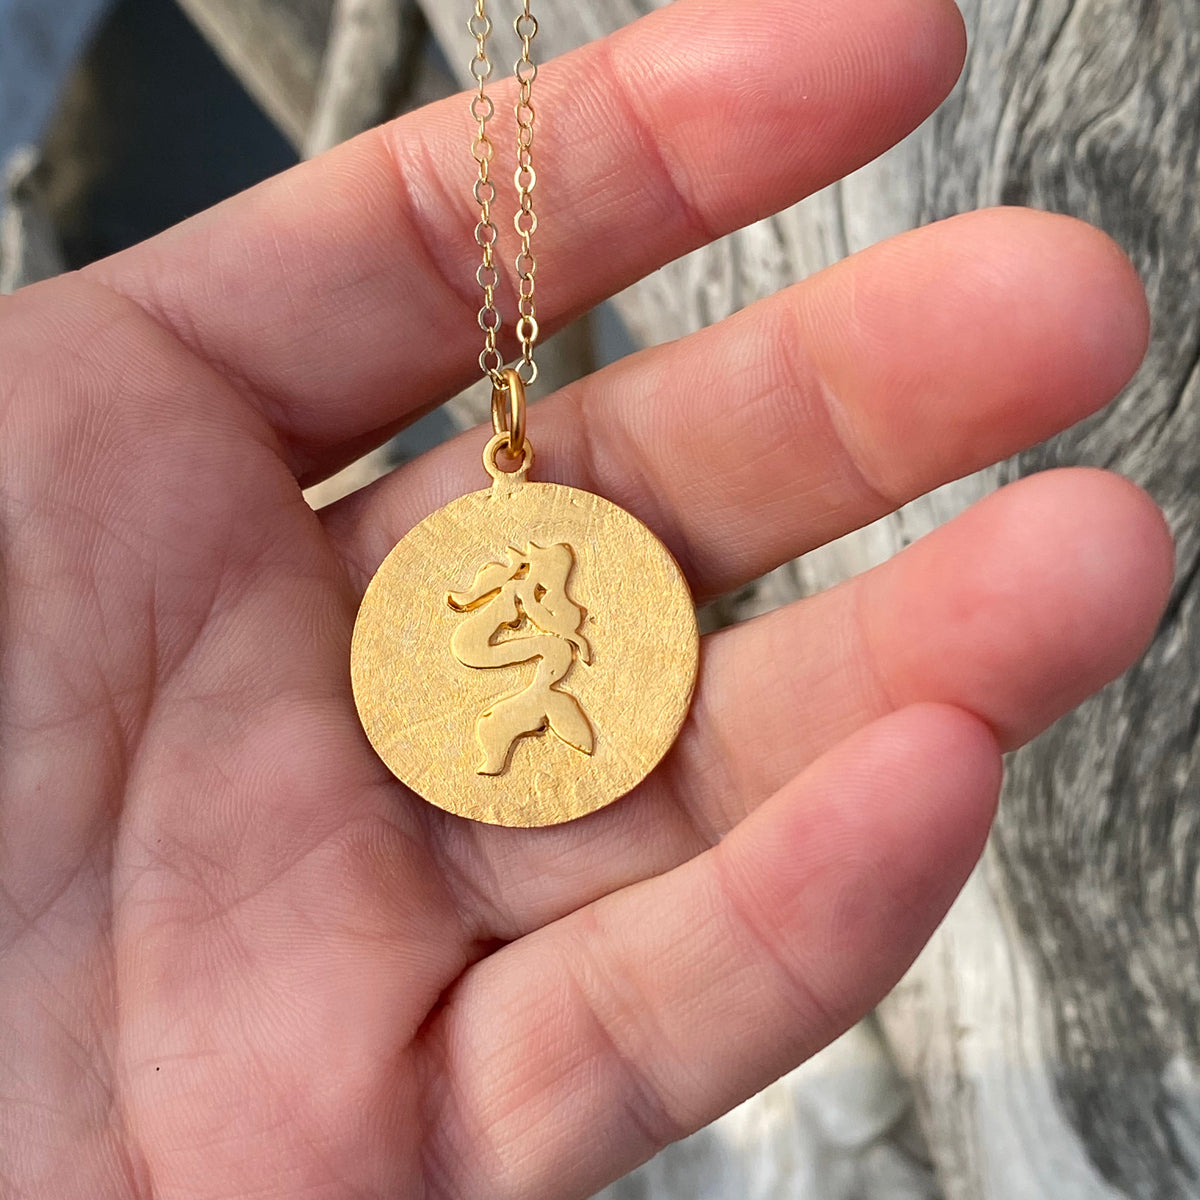 Gold Filled Sitting Mermaid Ocean Inspired Necklace from the Miss Scuba Jewelry Collection.